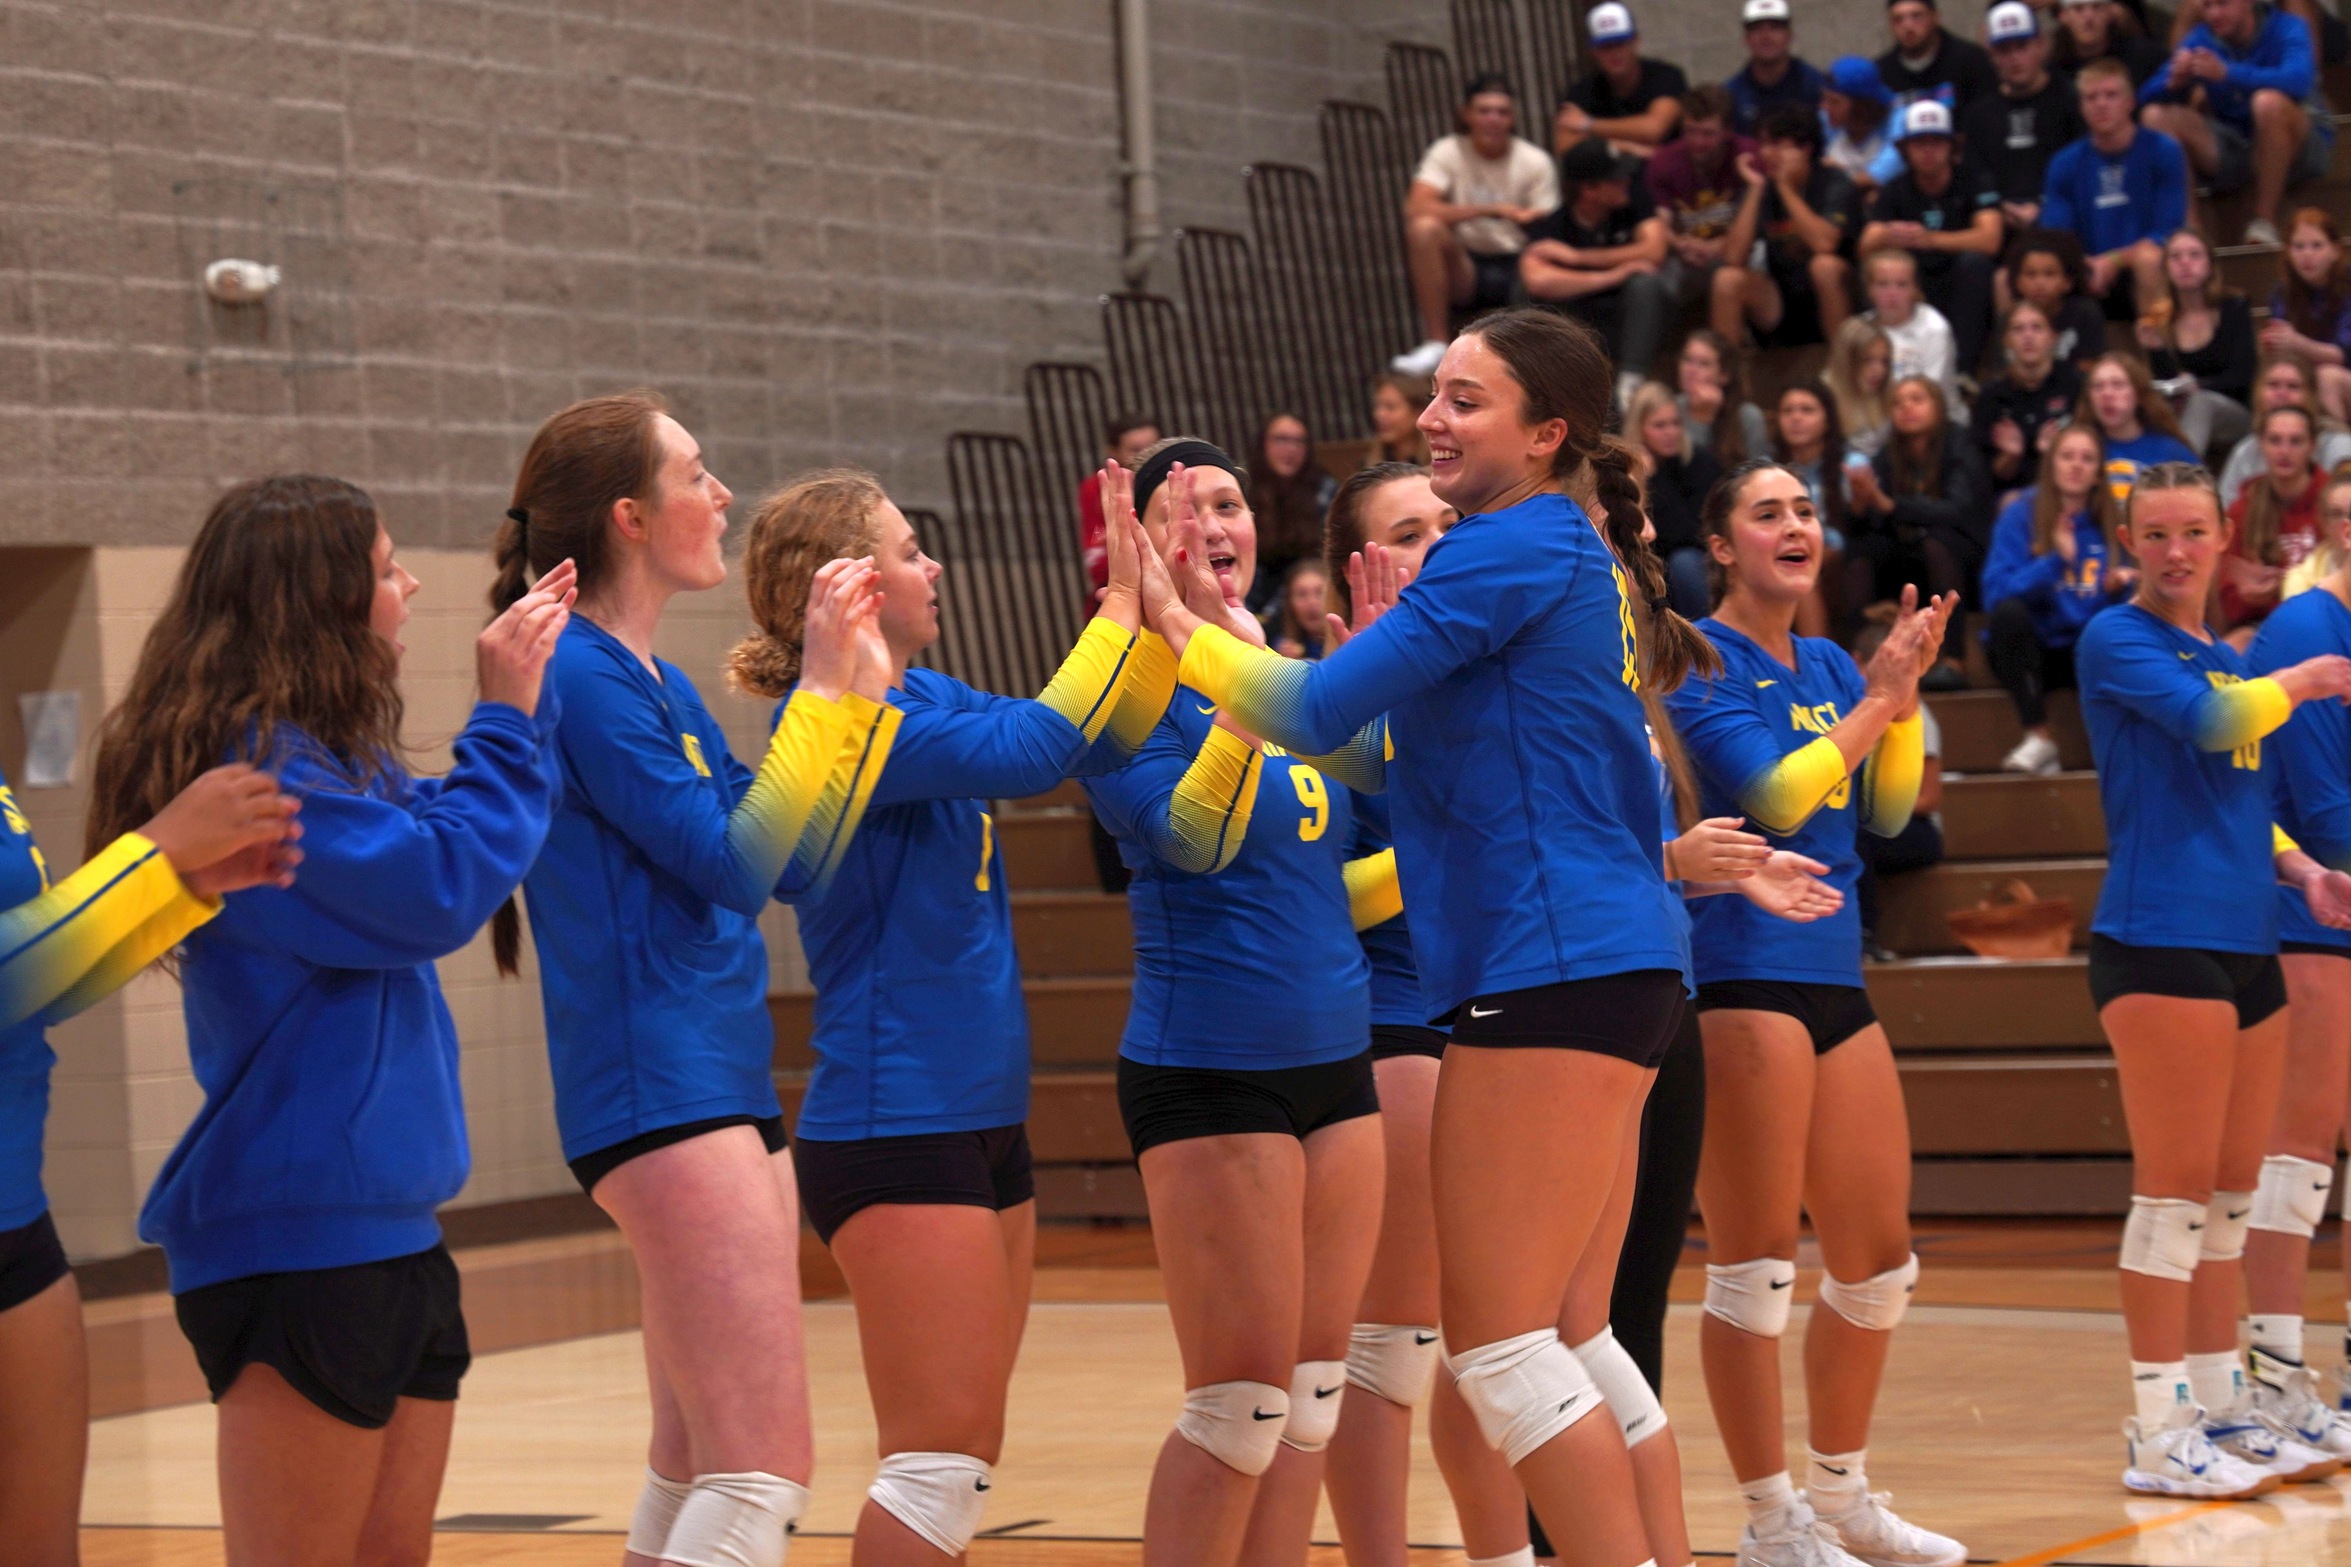 NIACC's Grace Tobin is announced during a recent home match. Photo by Kaitlyn Davis.